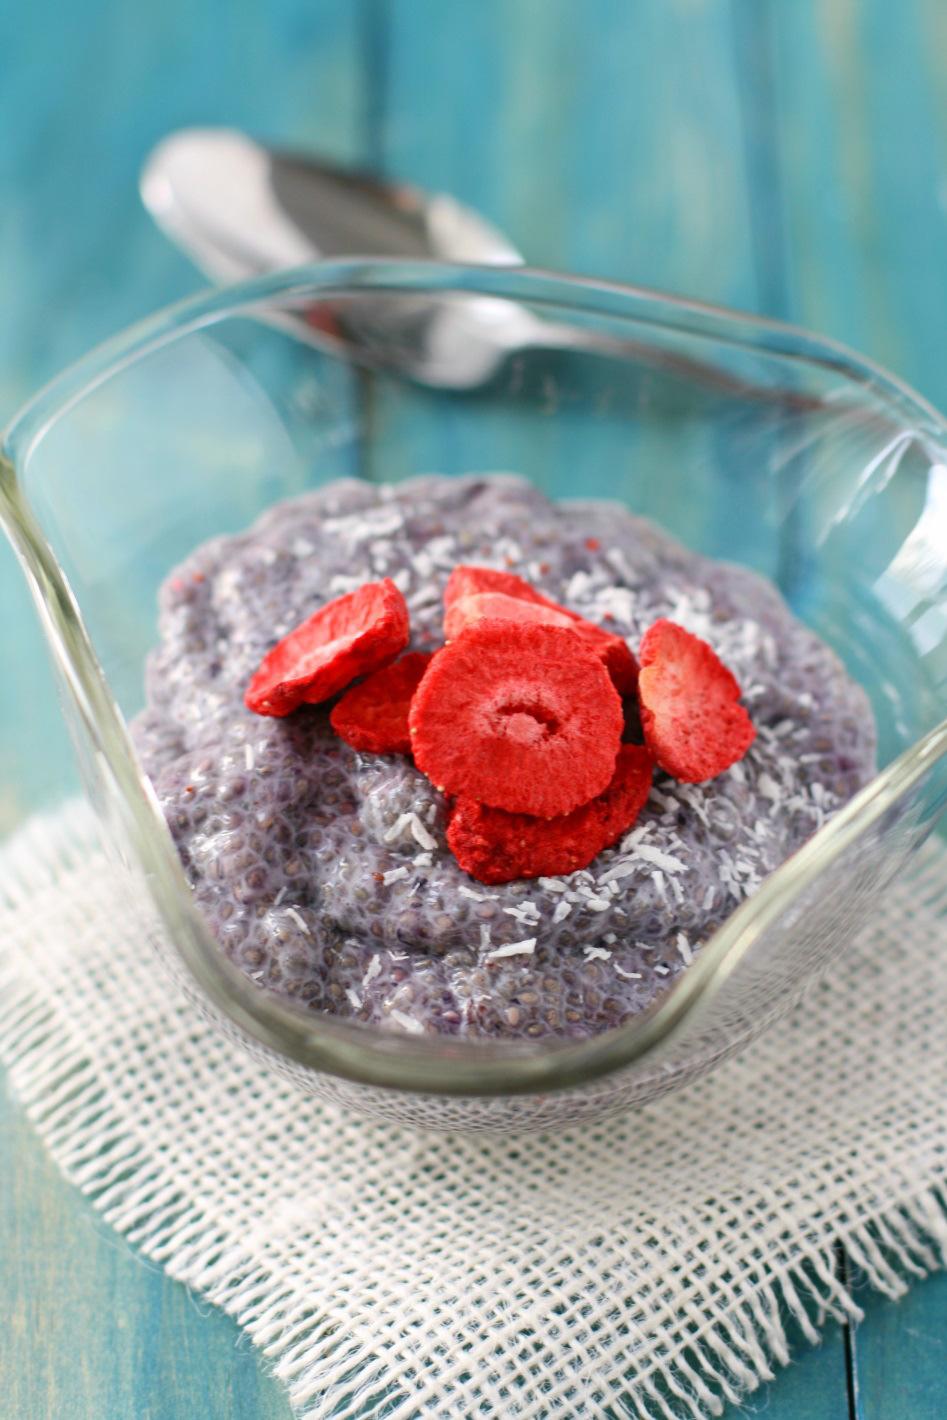 Blueberry Chia Seed Pudding ½ cup blueberries (frozen is okay, just let them thaw out a little bit first) 2 Tablespoons maple syrup 1 cup refrigerated coconut milk (I used SO Delicious Original) 1